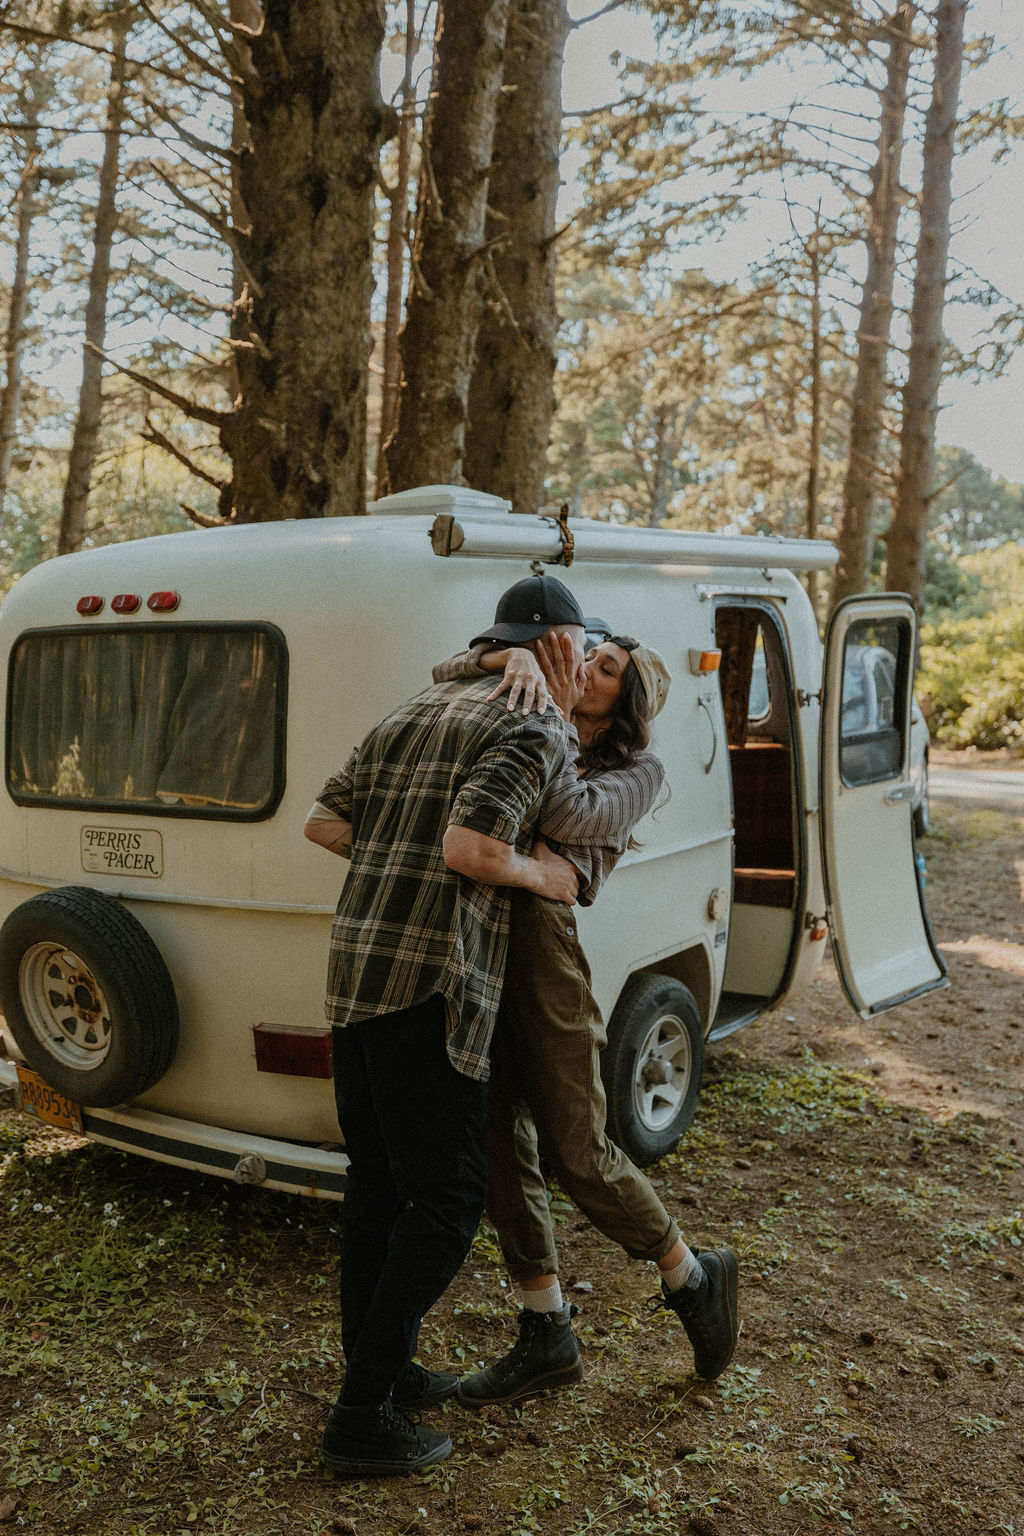 laughing and hugging each other next to their camper